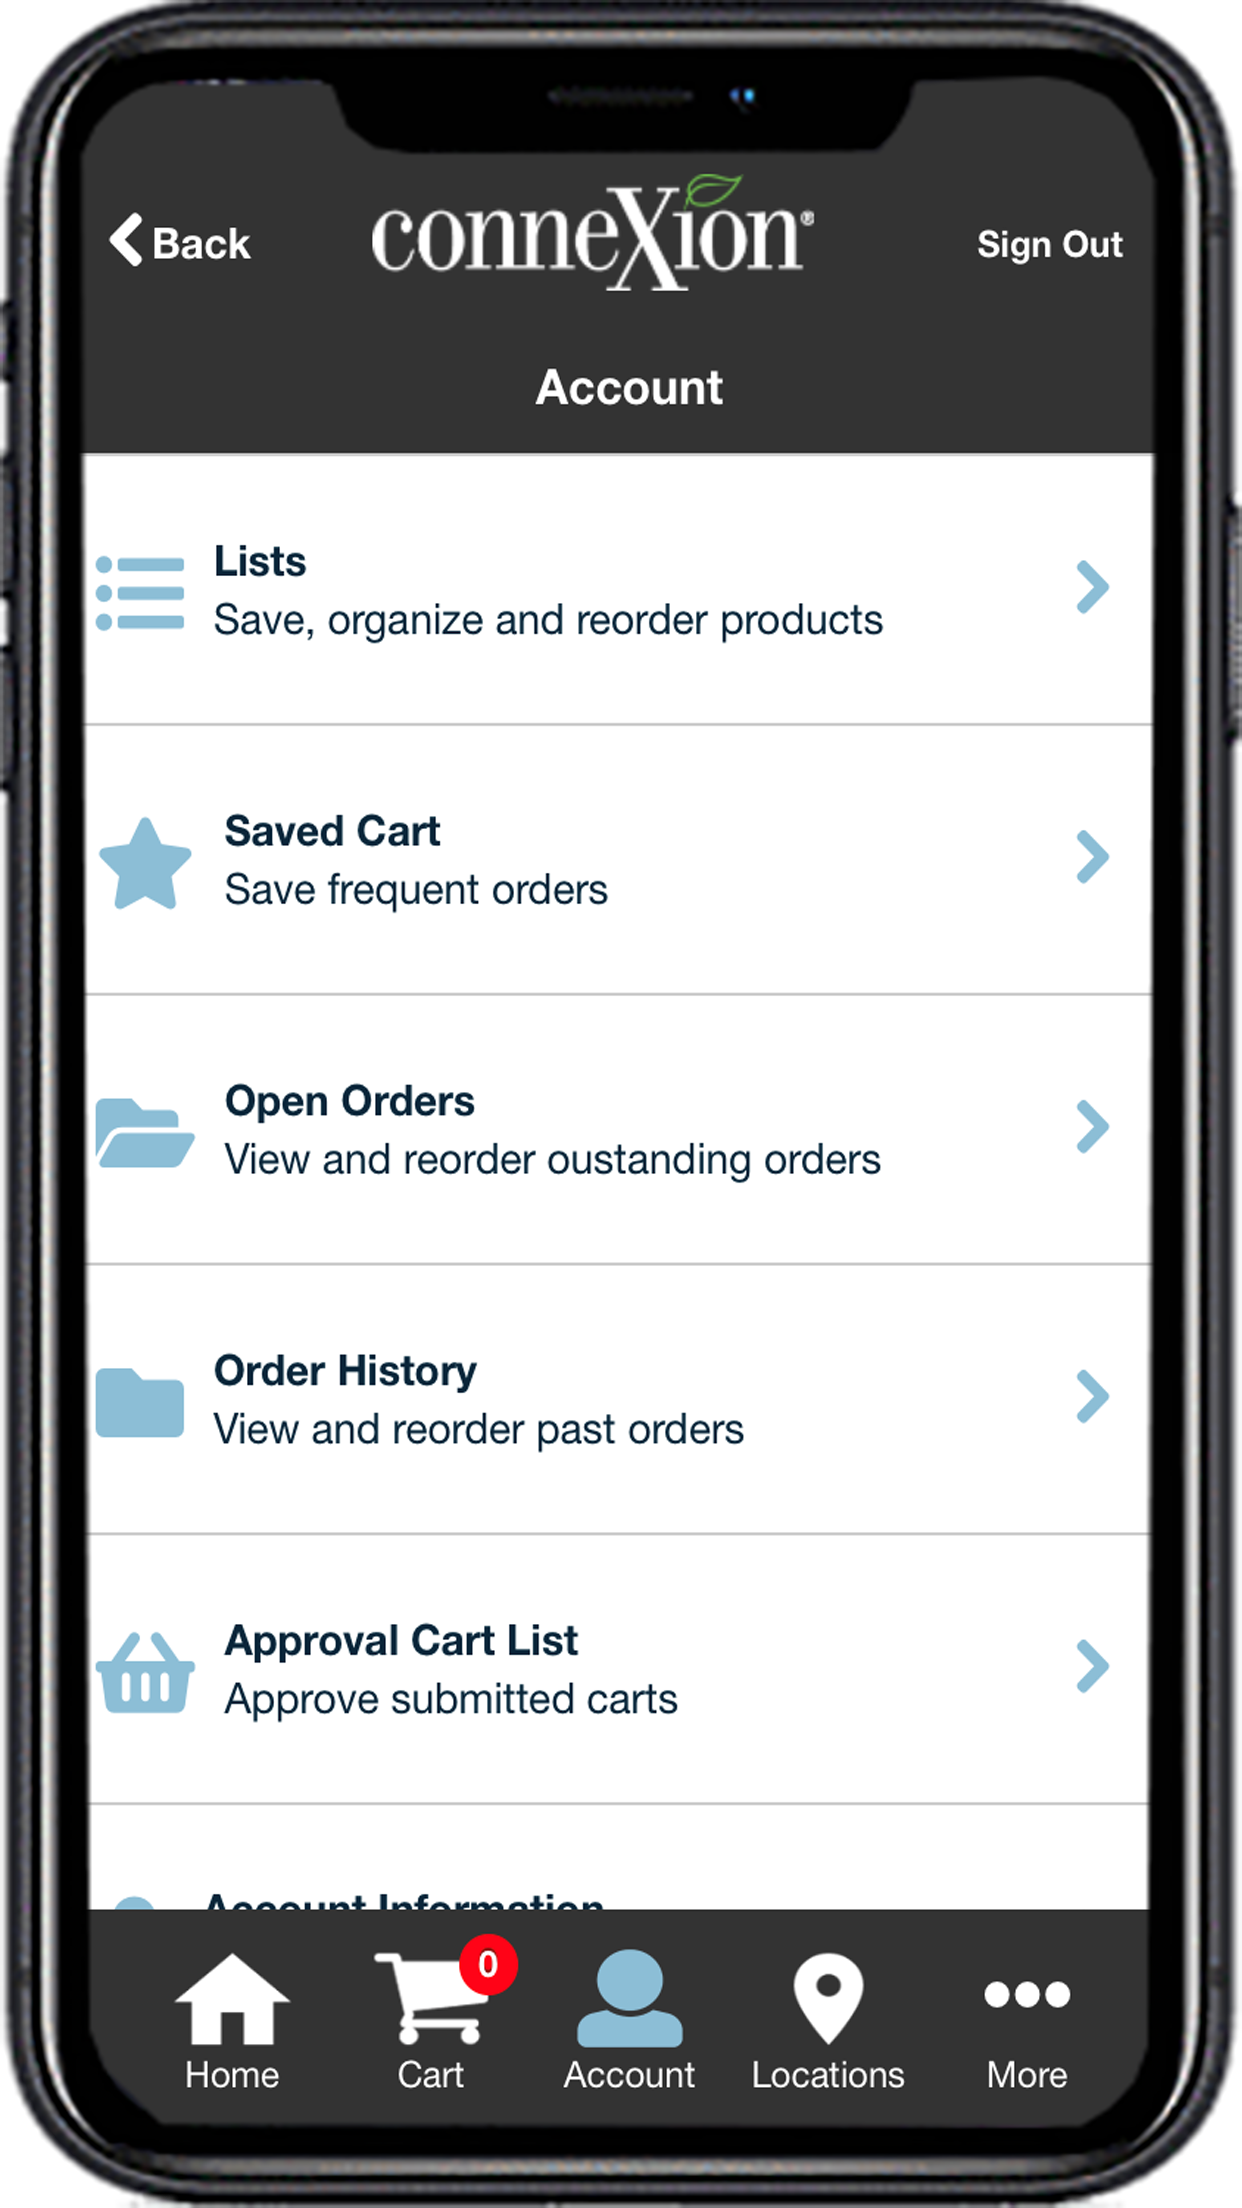 Manage saved lists and carts with ease